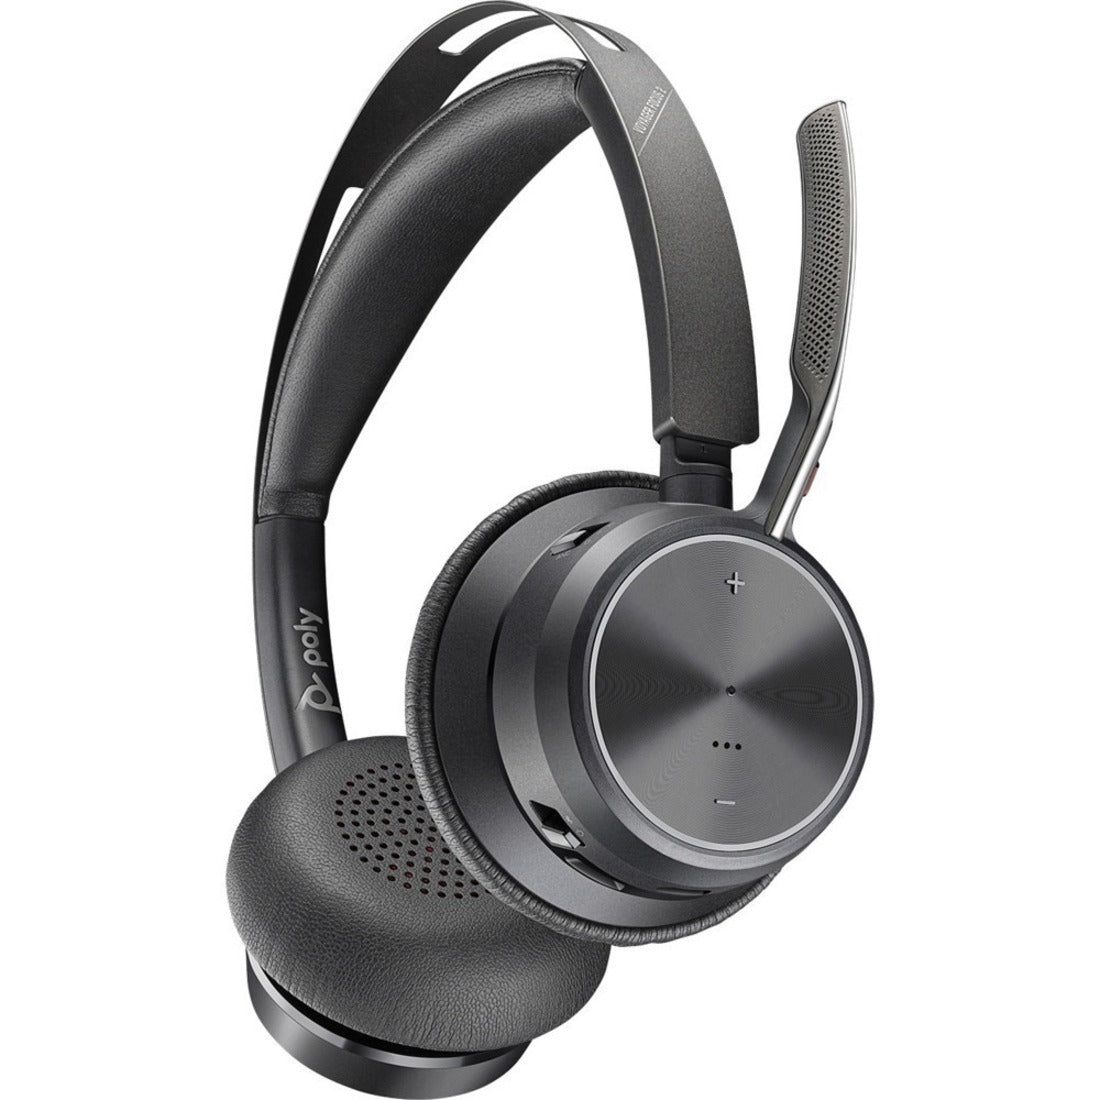 Poly 213727-02 Voyager Focus 2 Headset, Wireless Bluetooth Stereo Headphones with Noise Cancelling, 2 Year Warranty